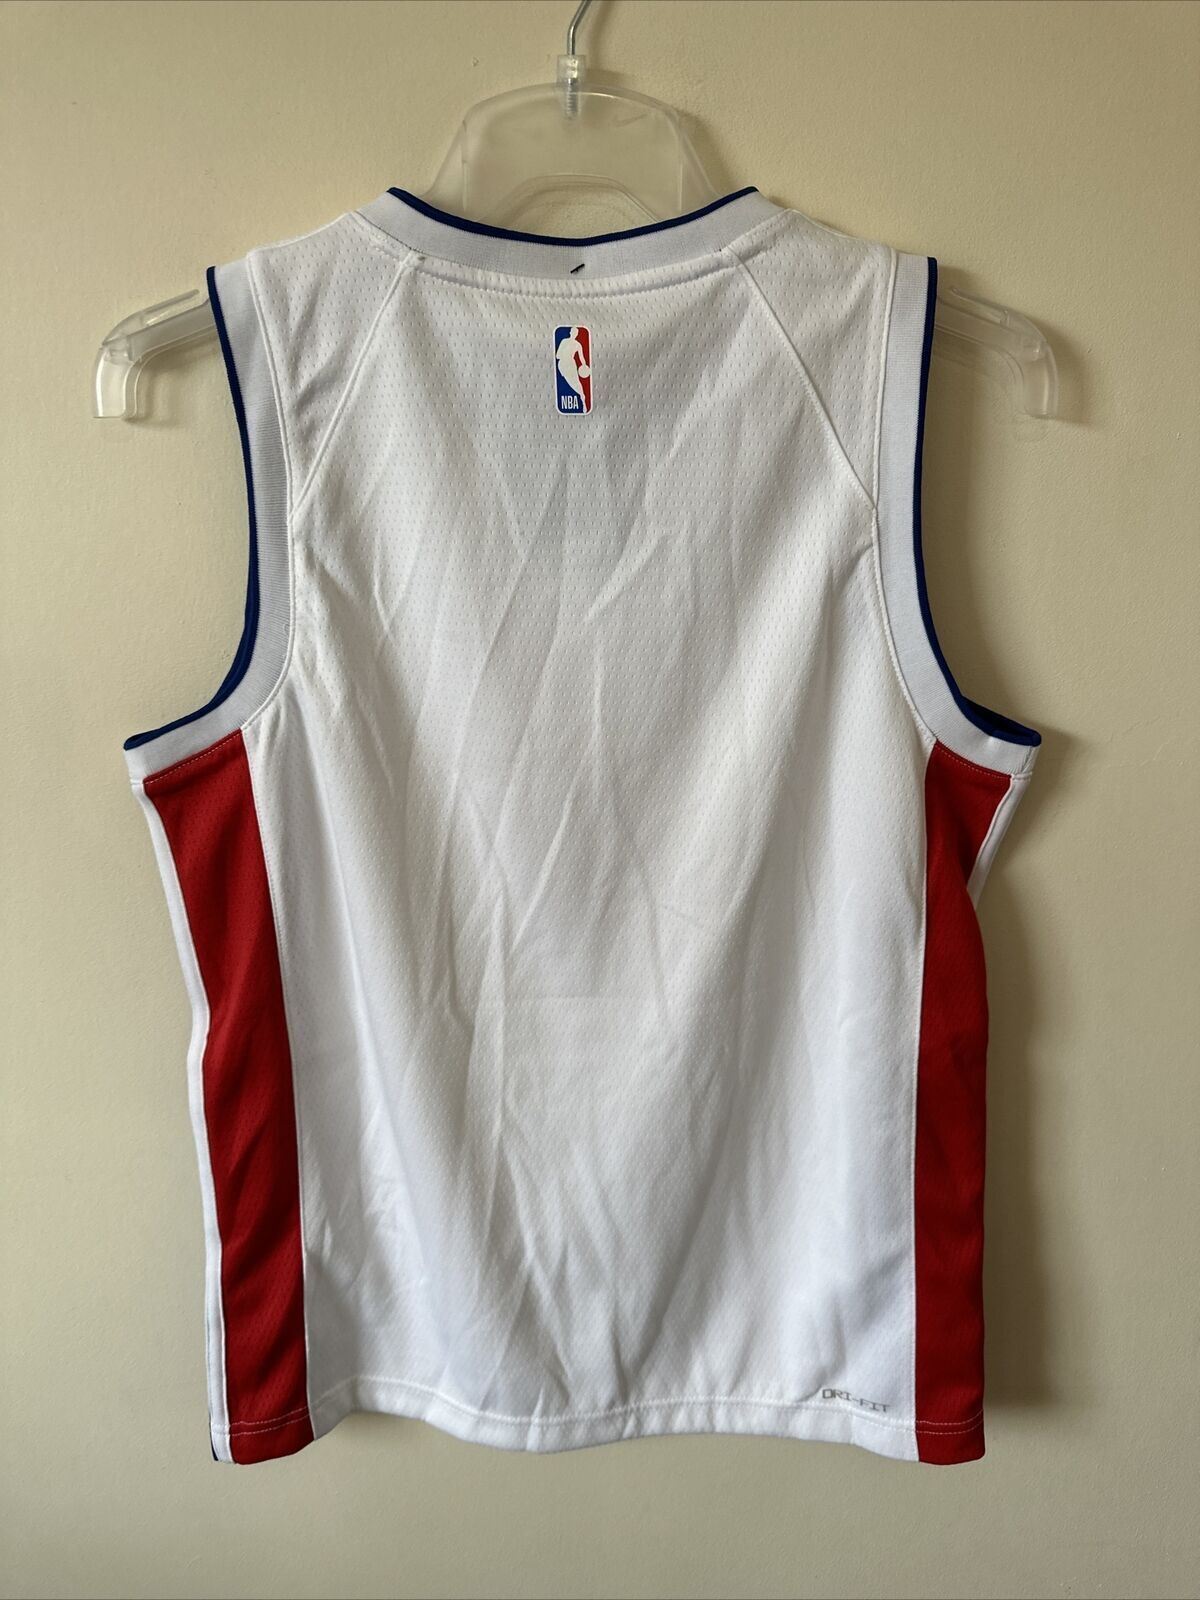 Nike NBA Detroit Pistons Association Edition Jersey Youth 12-13 Years